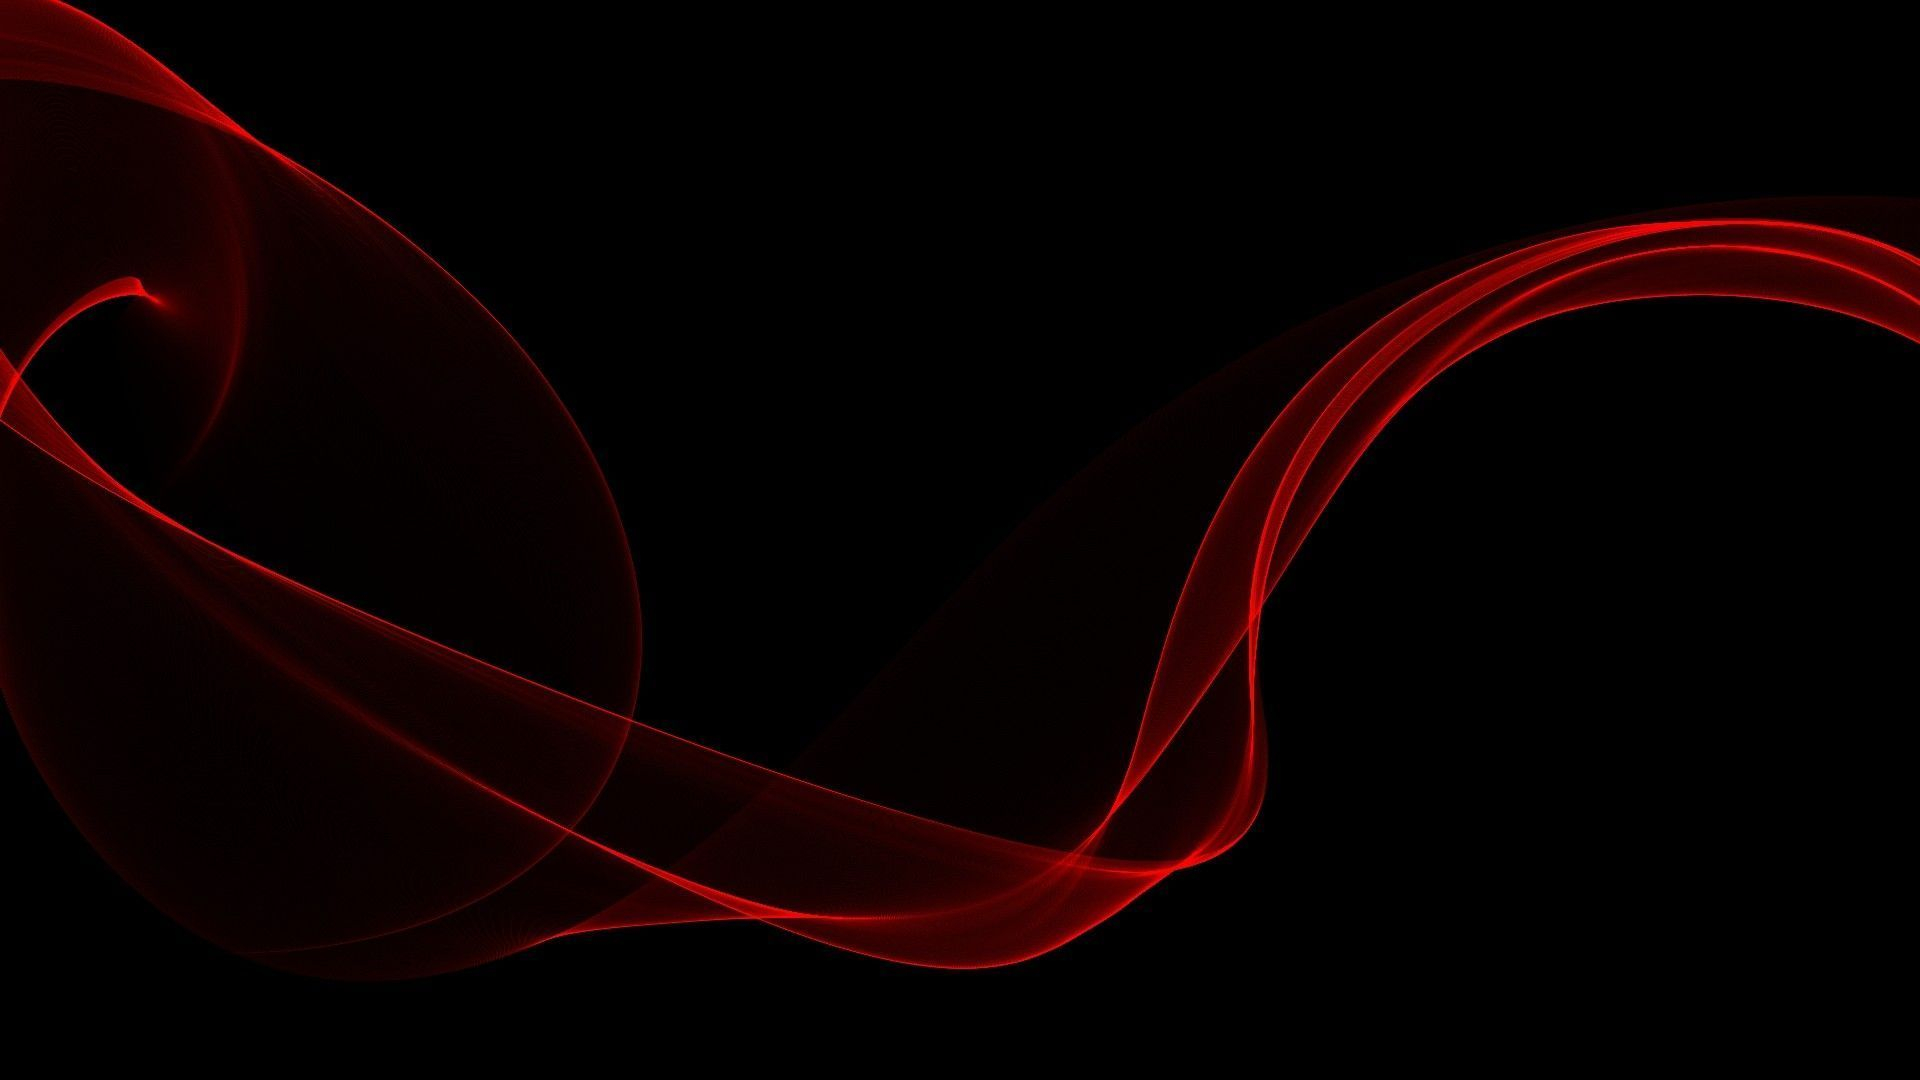 1920x1080 Red and Black Abstract Wallpapers Top Free Red and Black Abstract Backgrounds